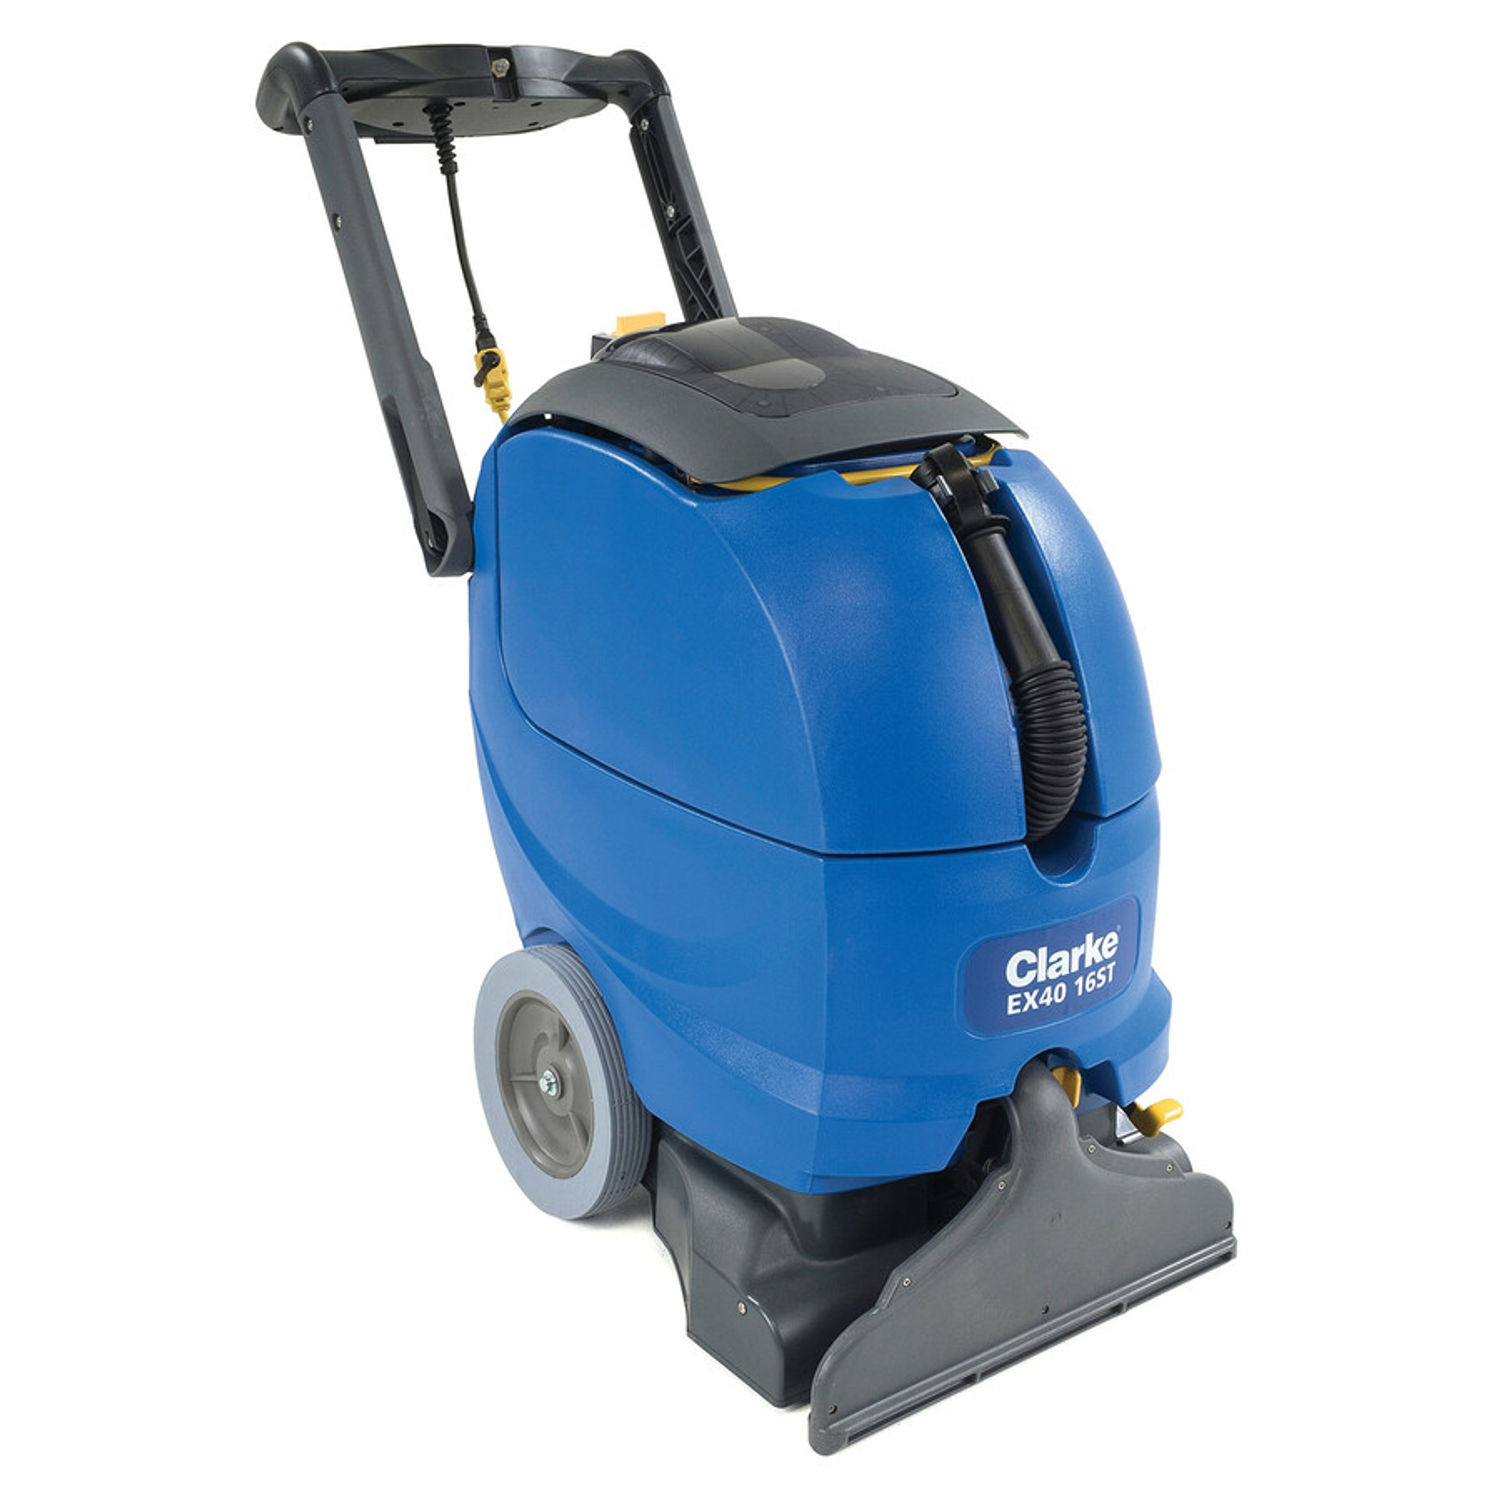 EX40 16ST Self-Contained Carpet Extractor 1118.55 W Motor, 9 gal Water Tank Capacity, Brush, 16" Cleaning Width, Carpet, Rug, Hard Floor, 50 ft Cable Length, 68 dB(A) Noise, Yellow